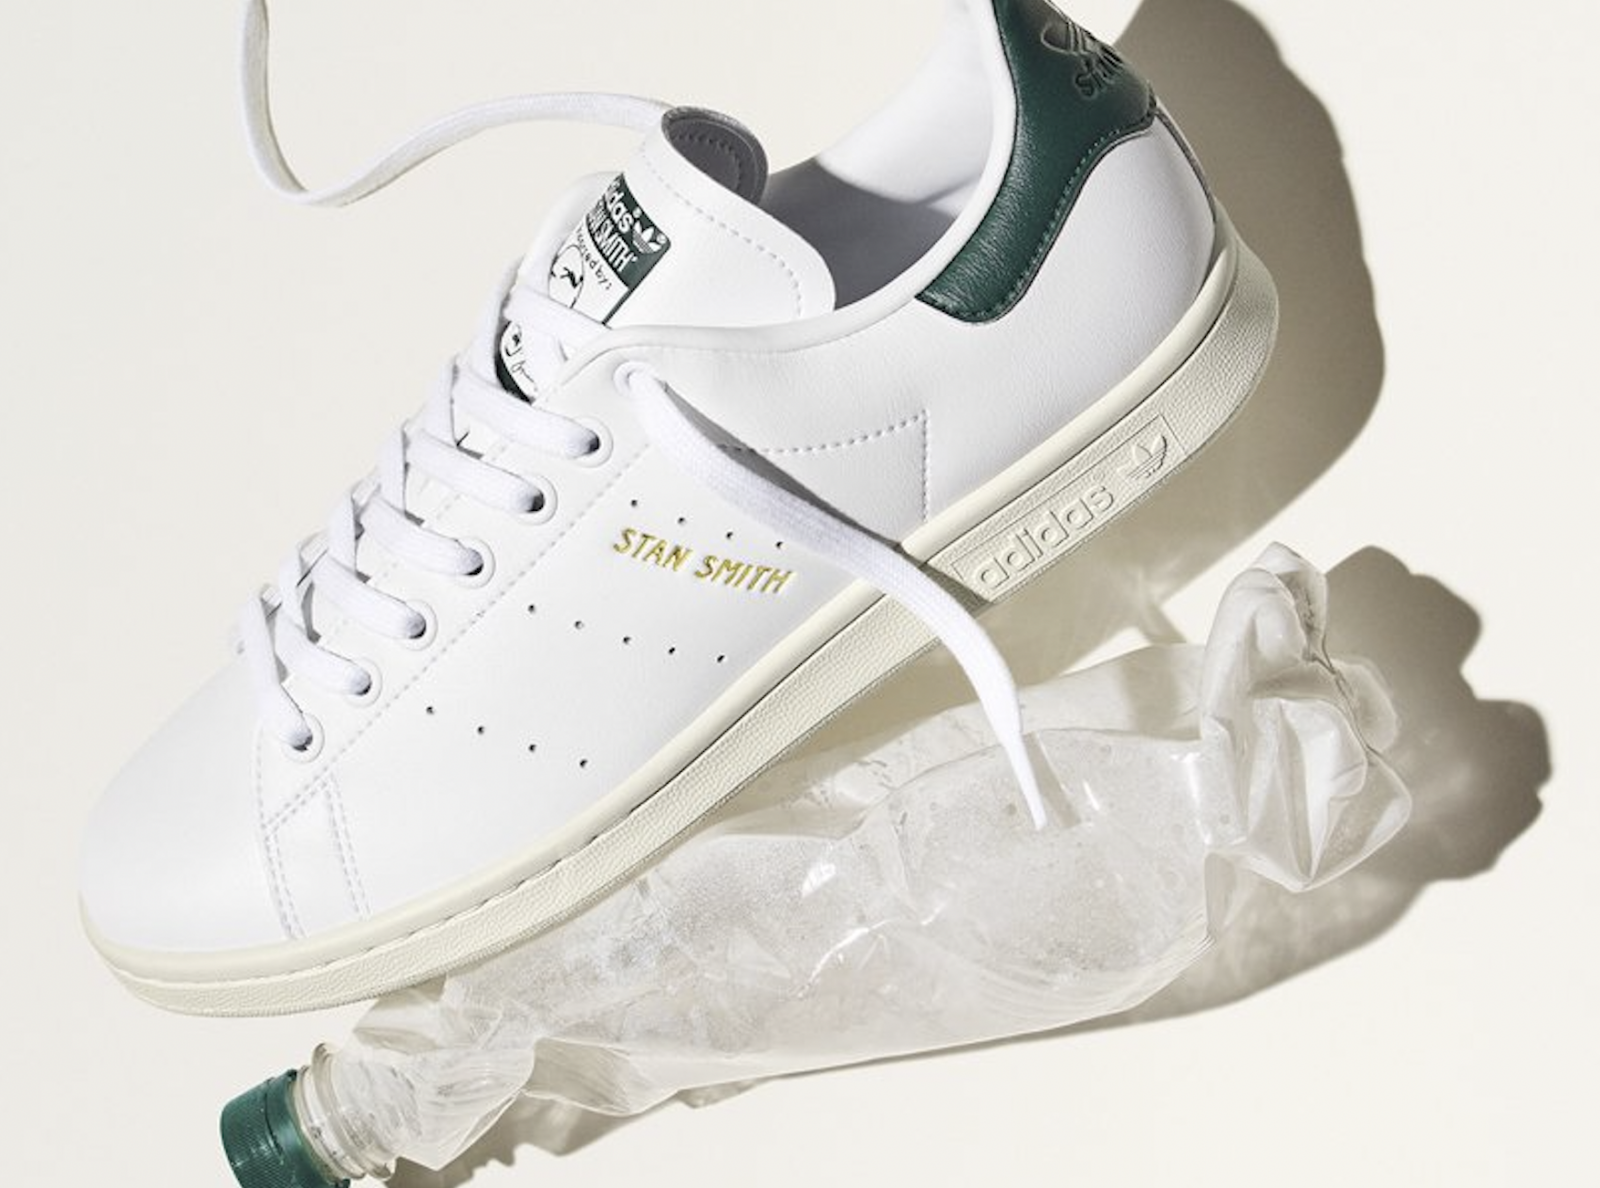 Haalbaar moederlijk vertaler French Advertising Watchdog Finds that Adidas' Ad for "Recycled" Stan Smith  Sneakers is Misleading - The Fashion Law